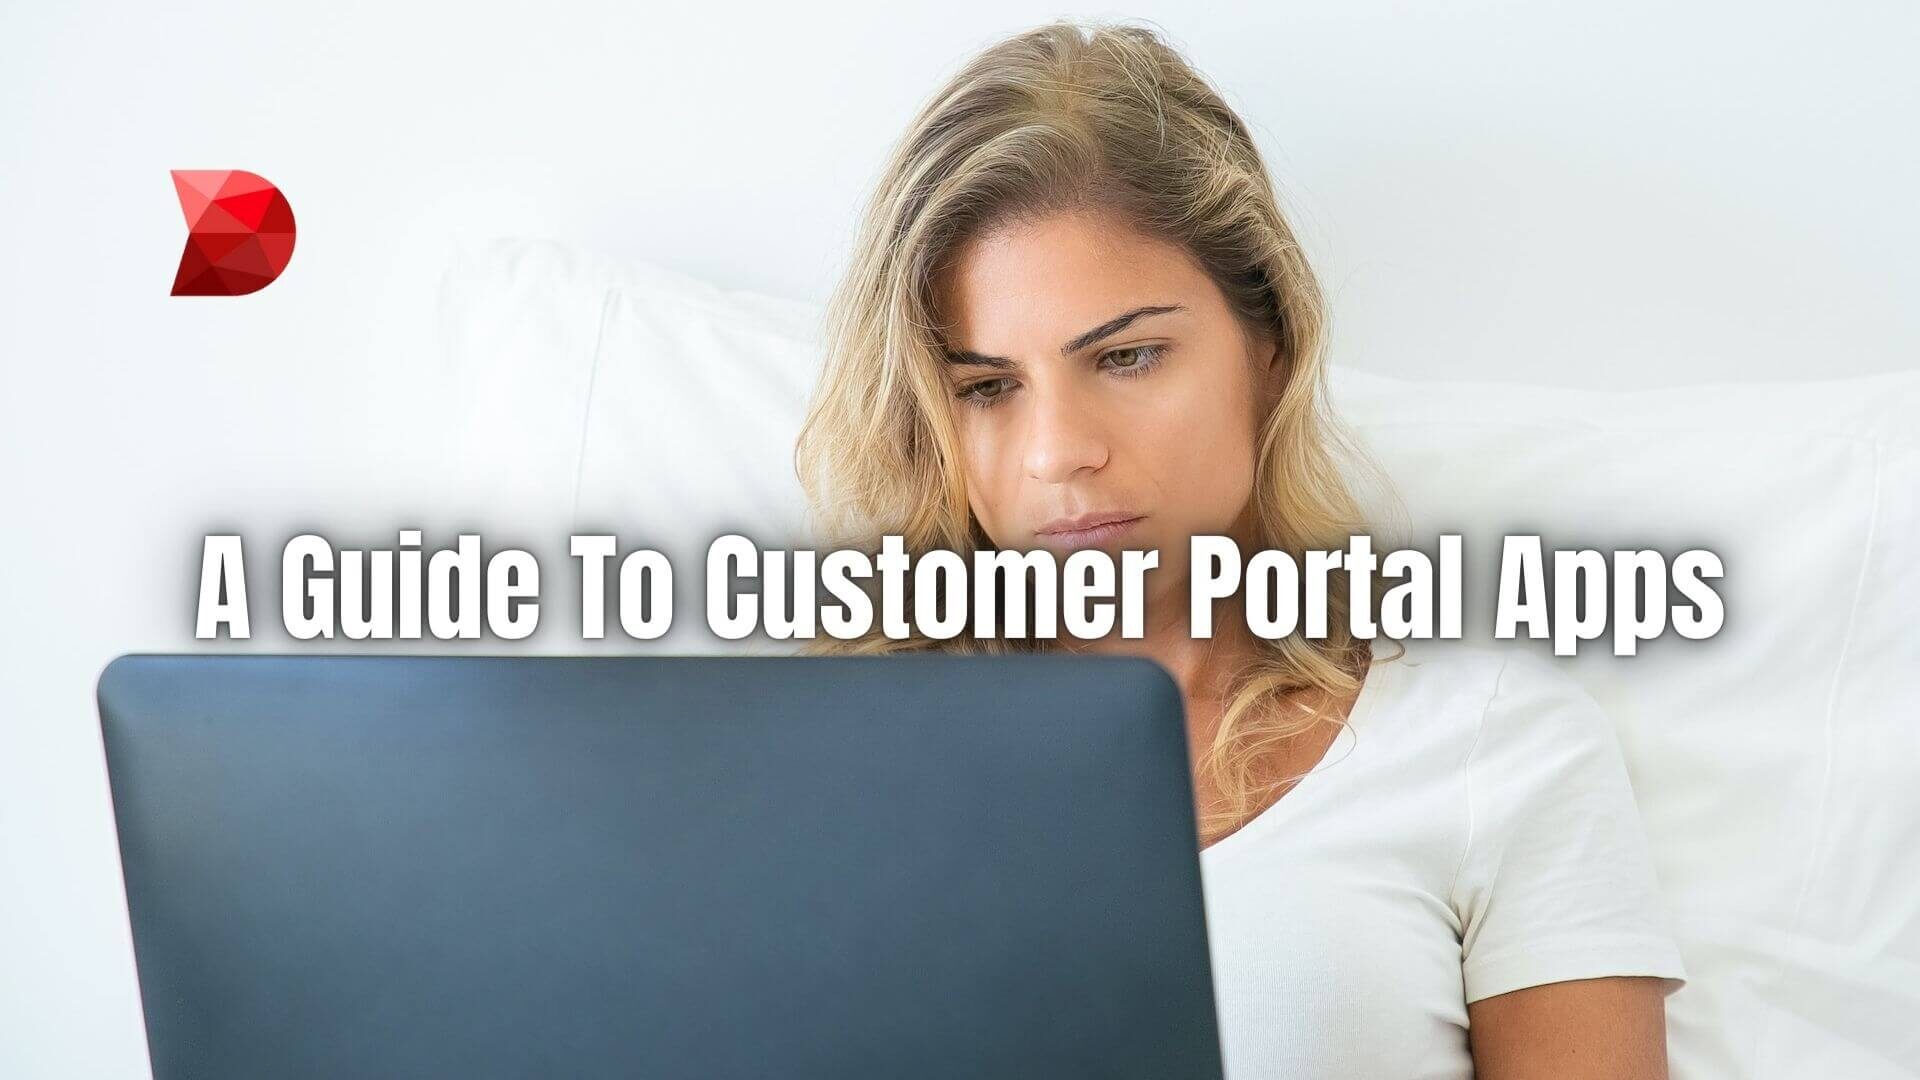 A customer portal app development gives consumers quick access to the services and information they need. Click here to learn more!